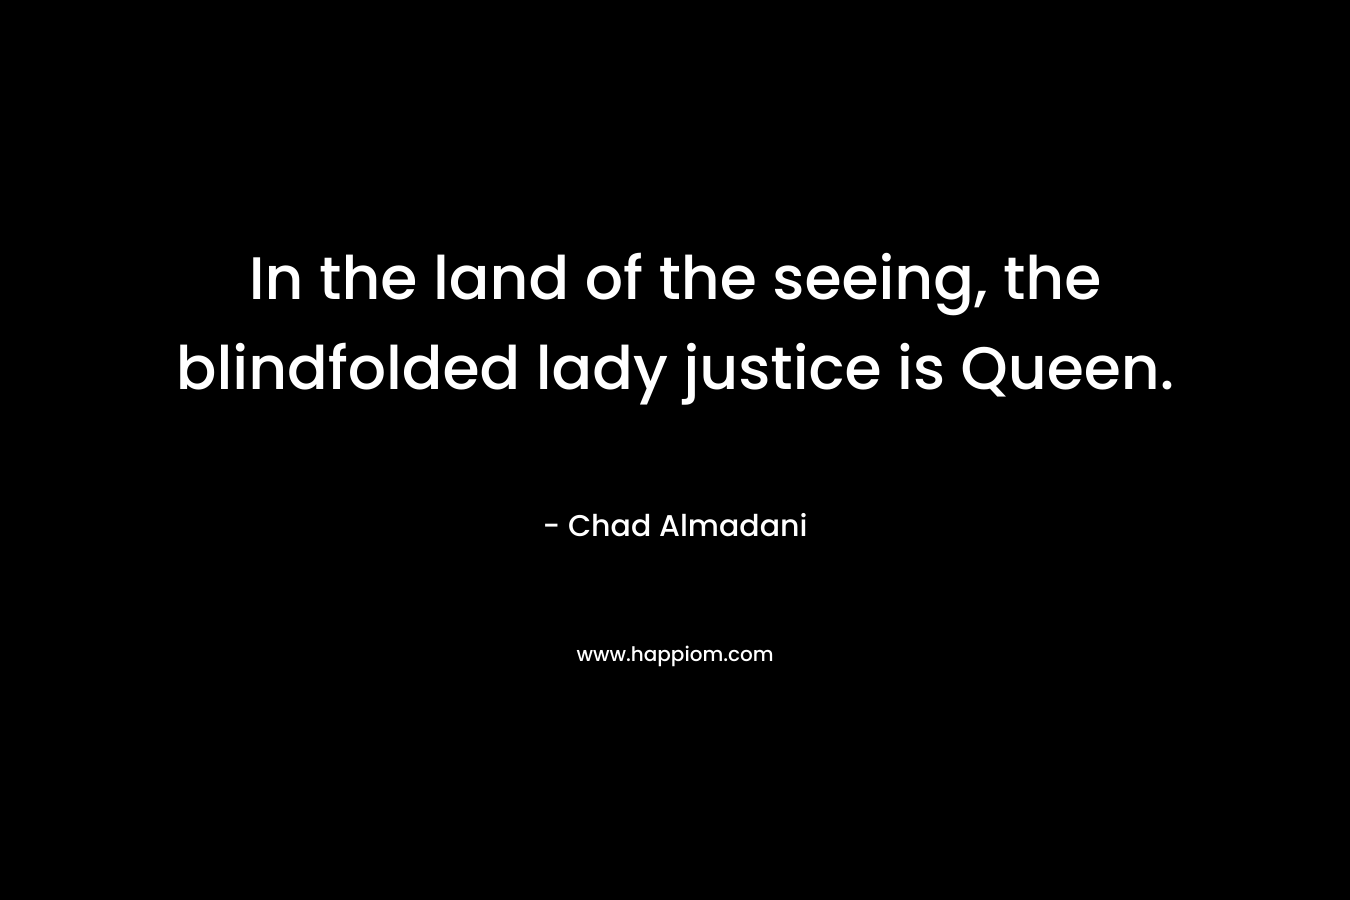 In the land of the seeing, the blindfolded lady justice is Queen. – Chad Almadani